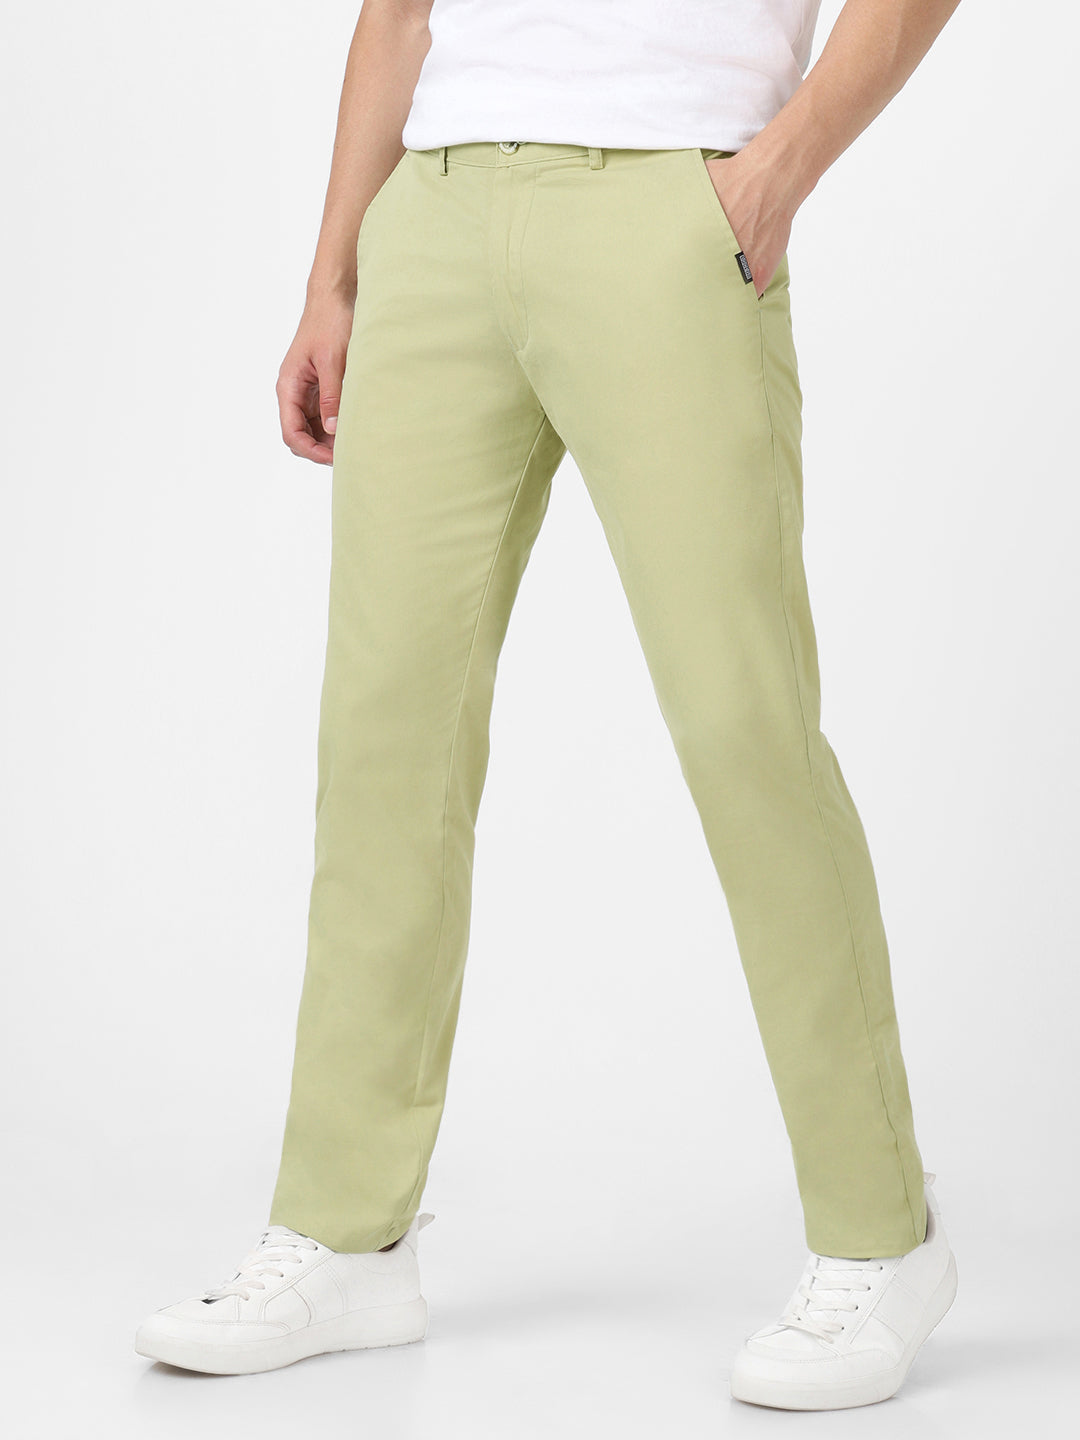 Men's Green Cotton Light Weight Non-Stretch Slim Fit Casual Trousers